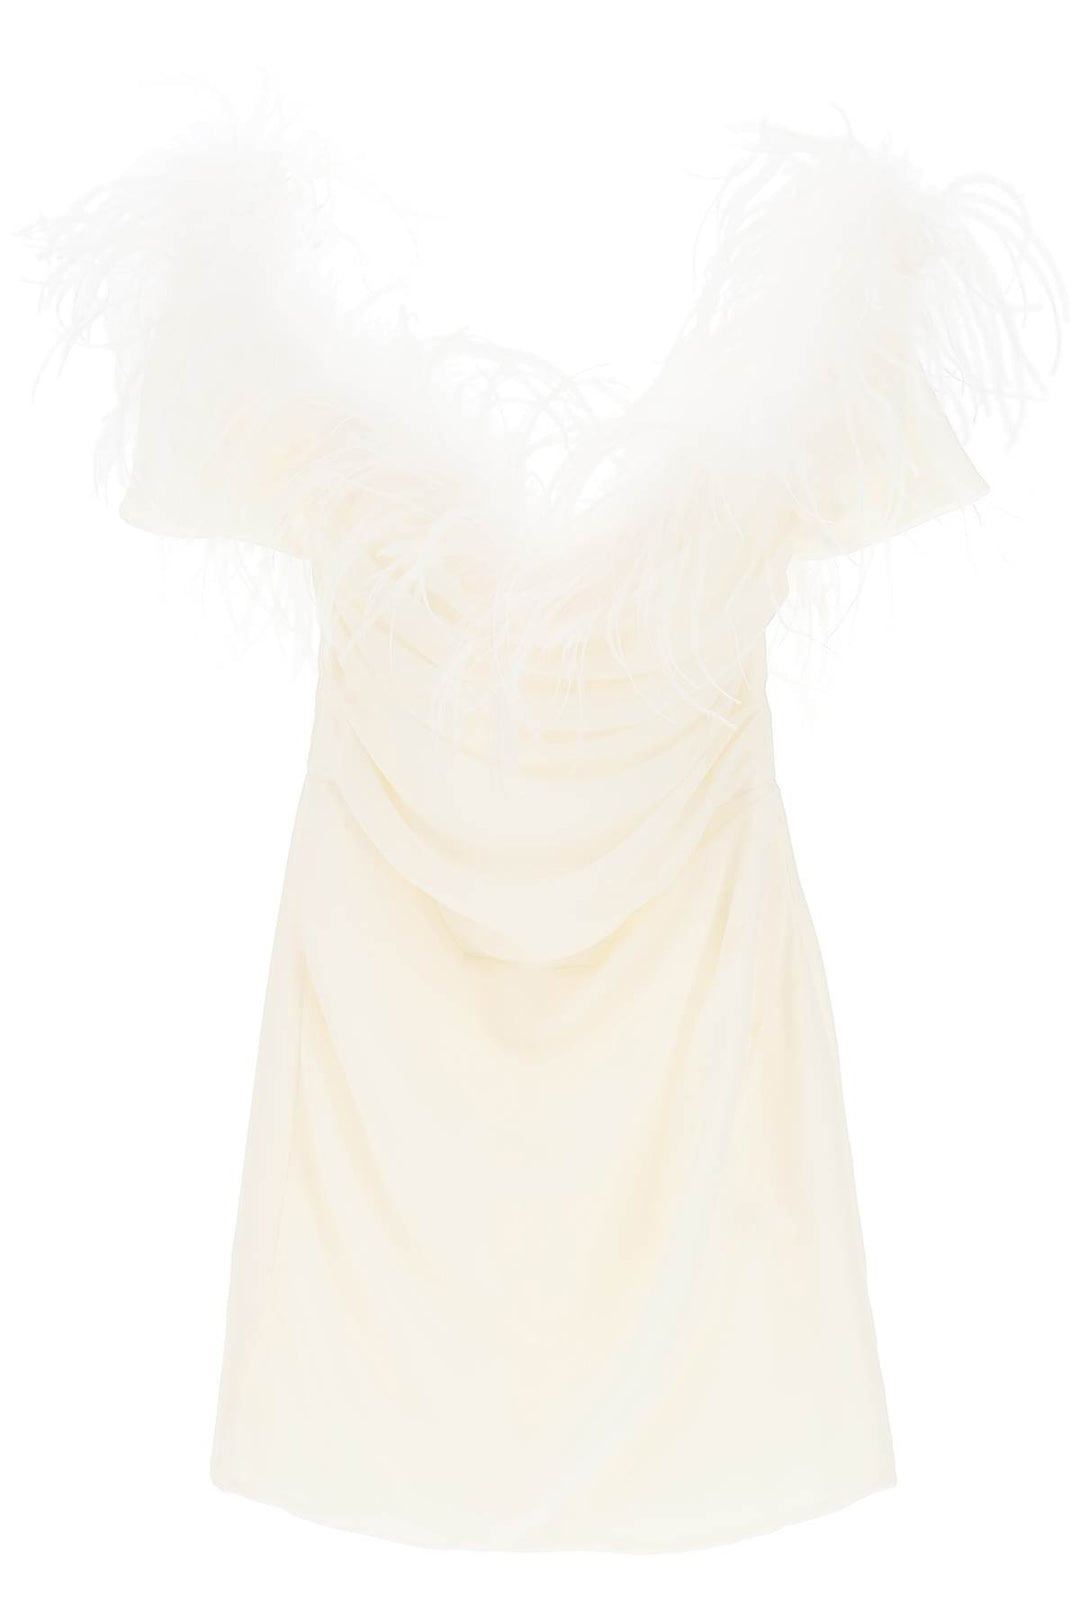 Giuseppe di morabito mini dress in poly georgette with feathers-0